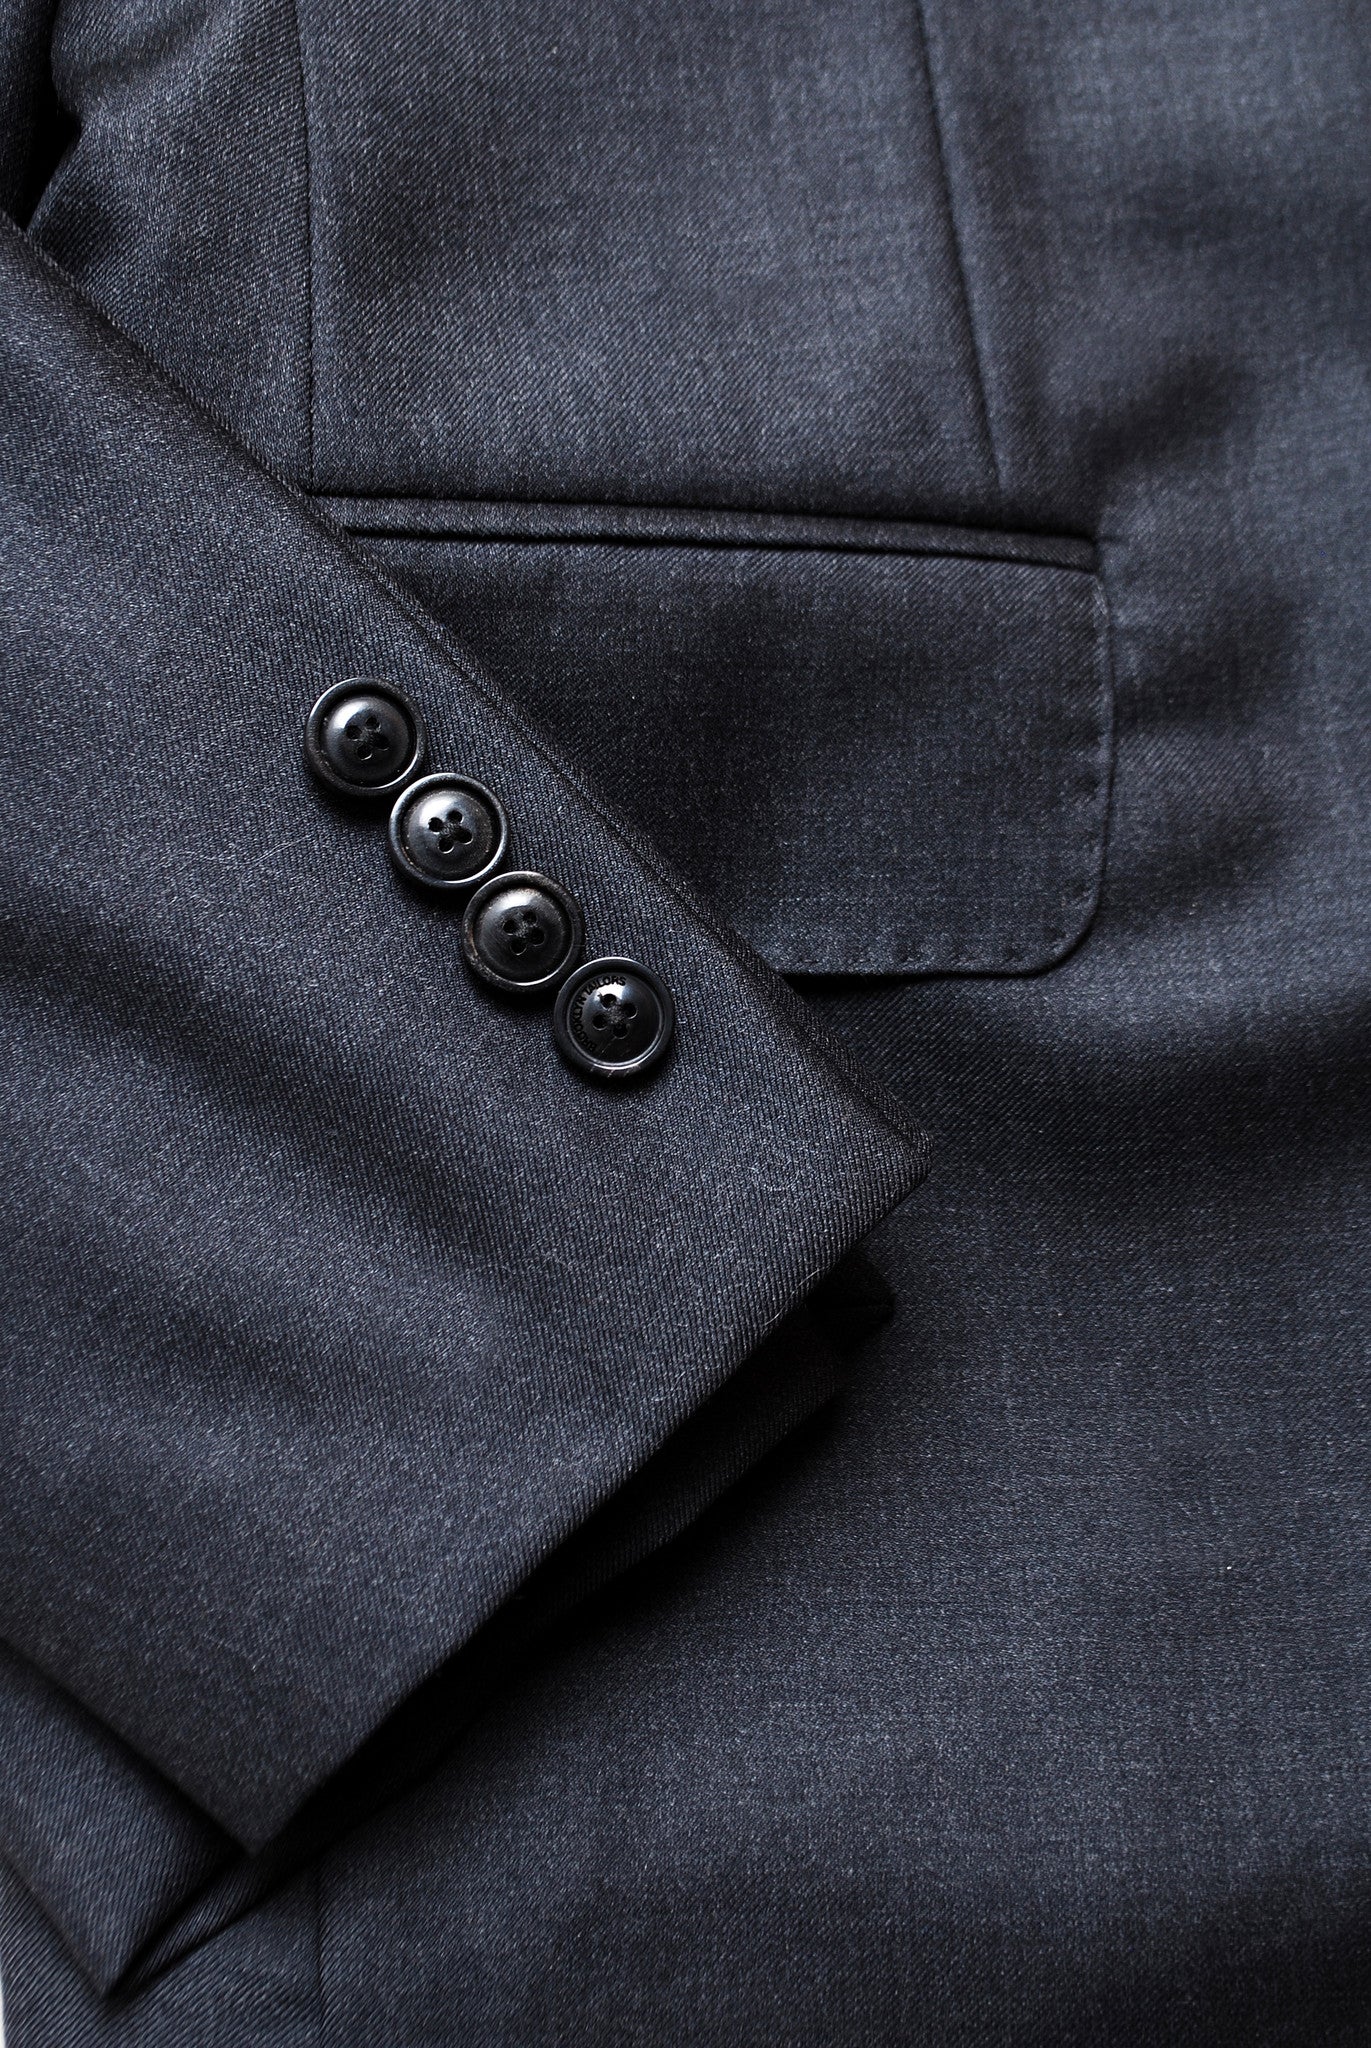 2020 Version BKT50 Tailored Jacket in Super 110s Twill - Charcoal